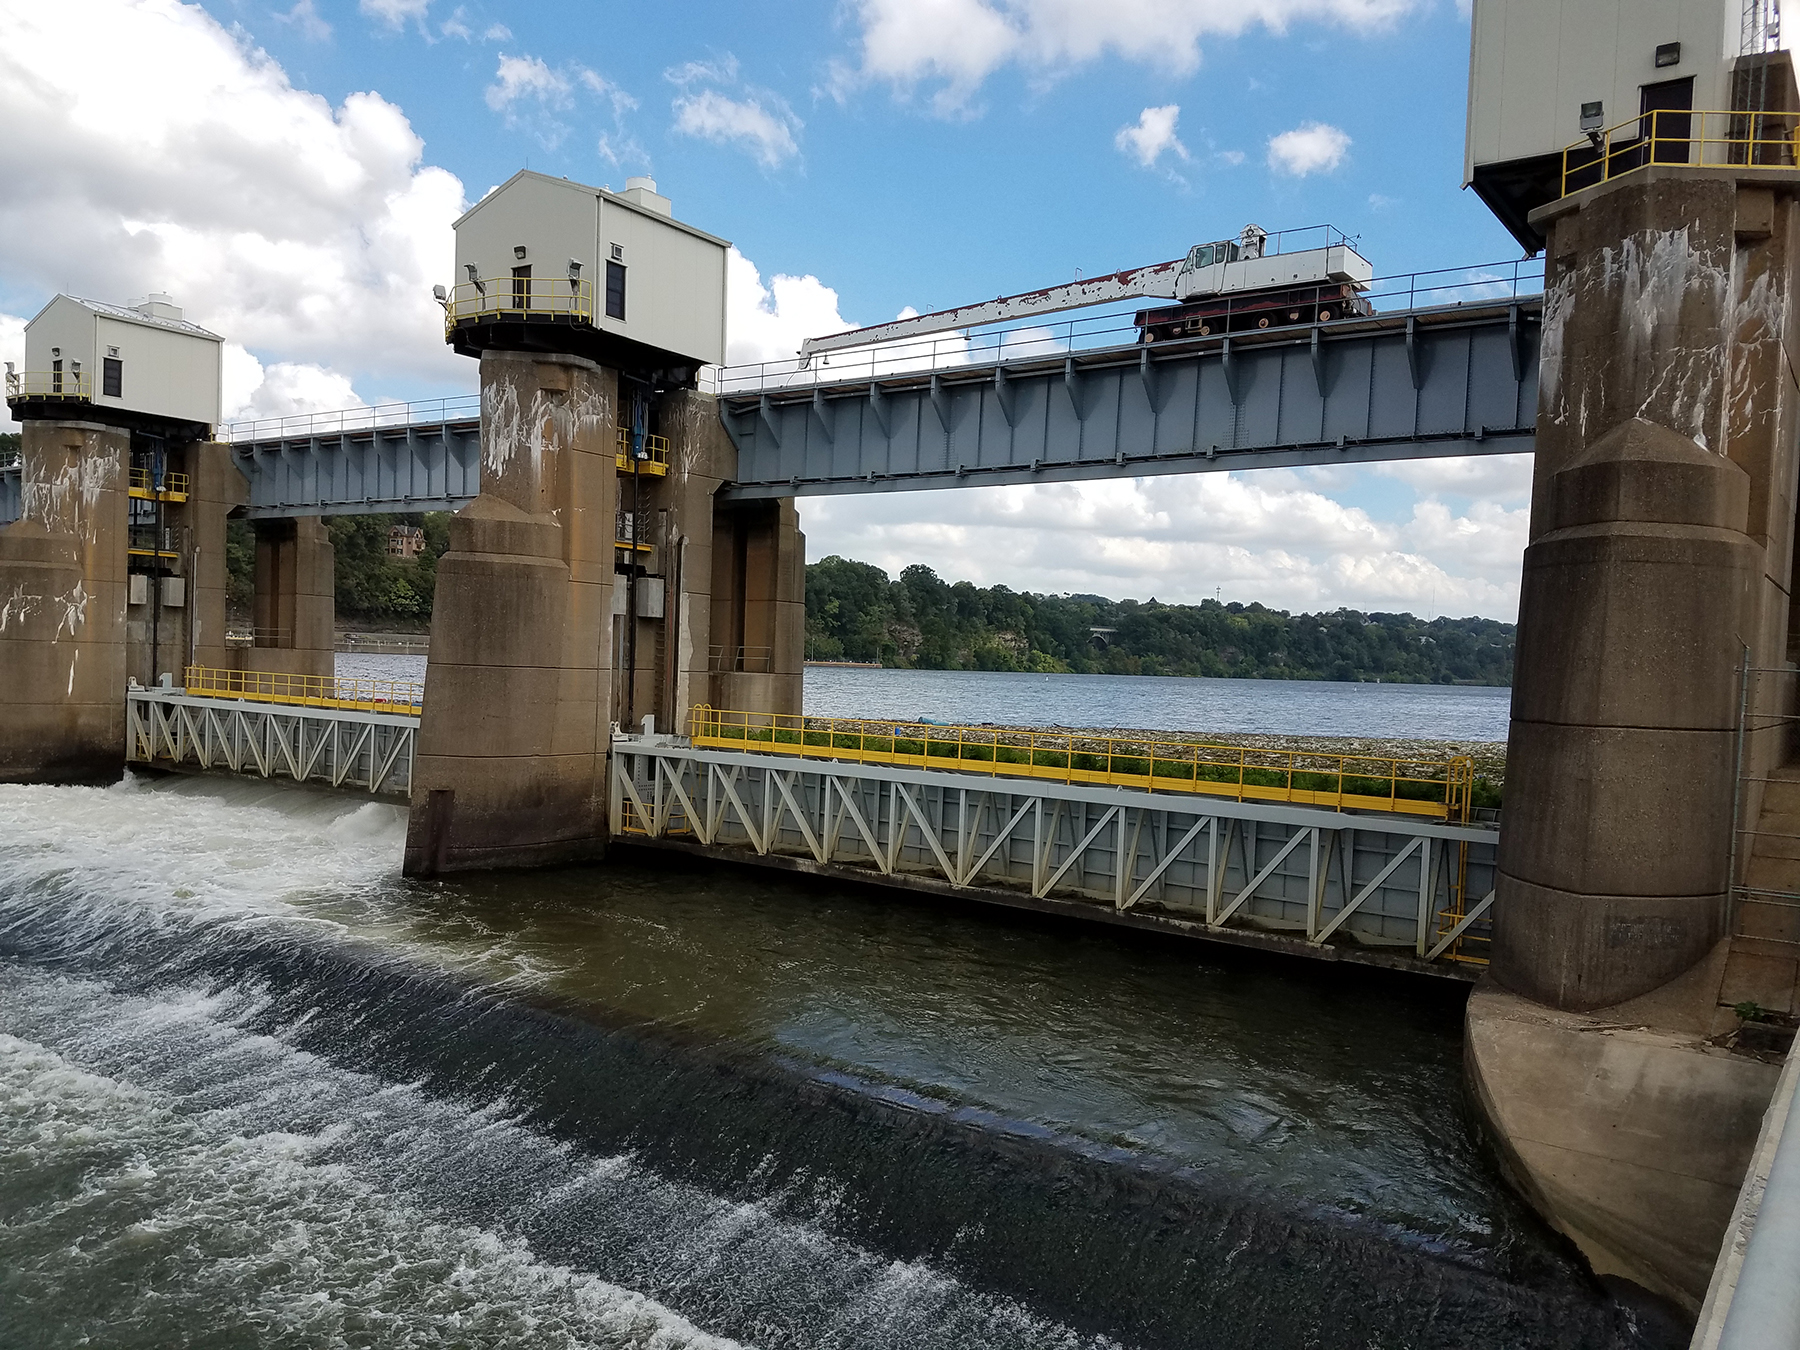 Rye Development plans to add a powerhouse with two turbines to the Allegheny River Locks and Dam 2, an approximately 1,400 ft long fixed-crest dam having no gates and a single lock chamber. (Photo by Andrew Byrne, U.S. Army Corps of Engineers, Pittsburgh District)